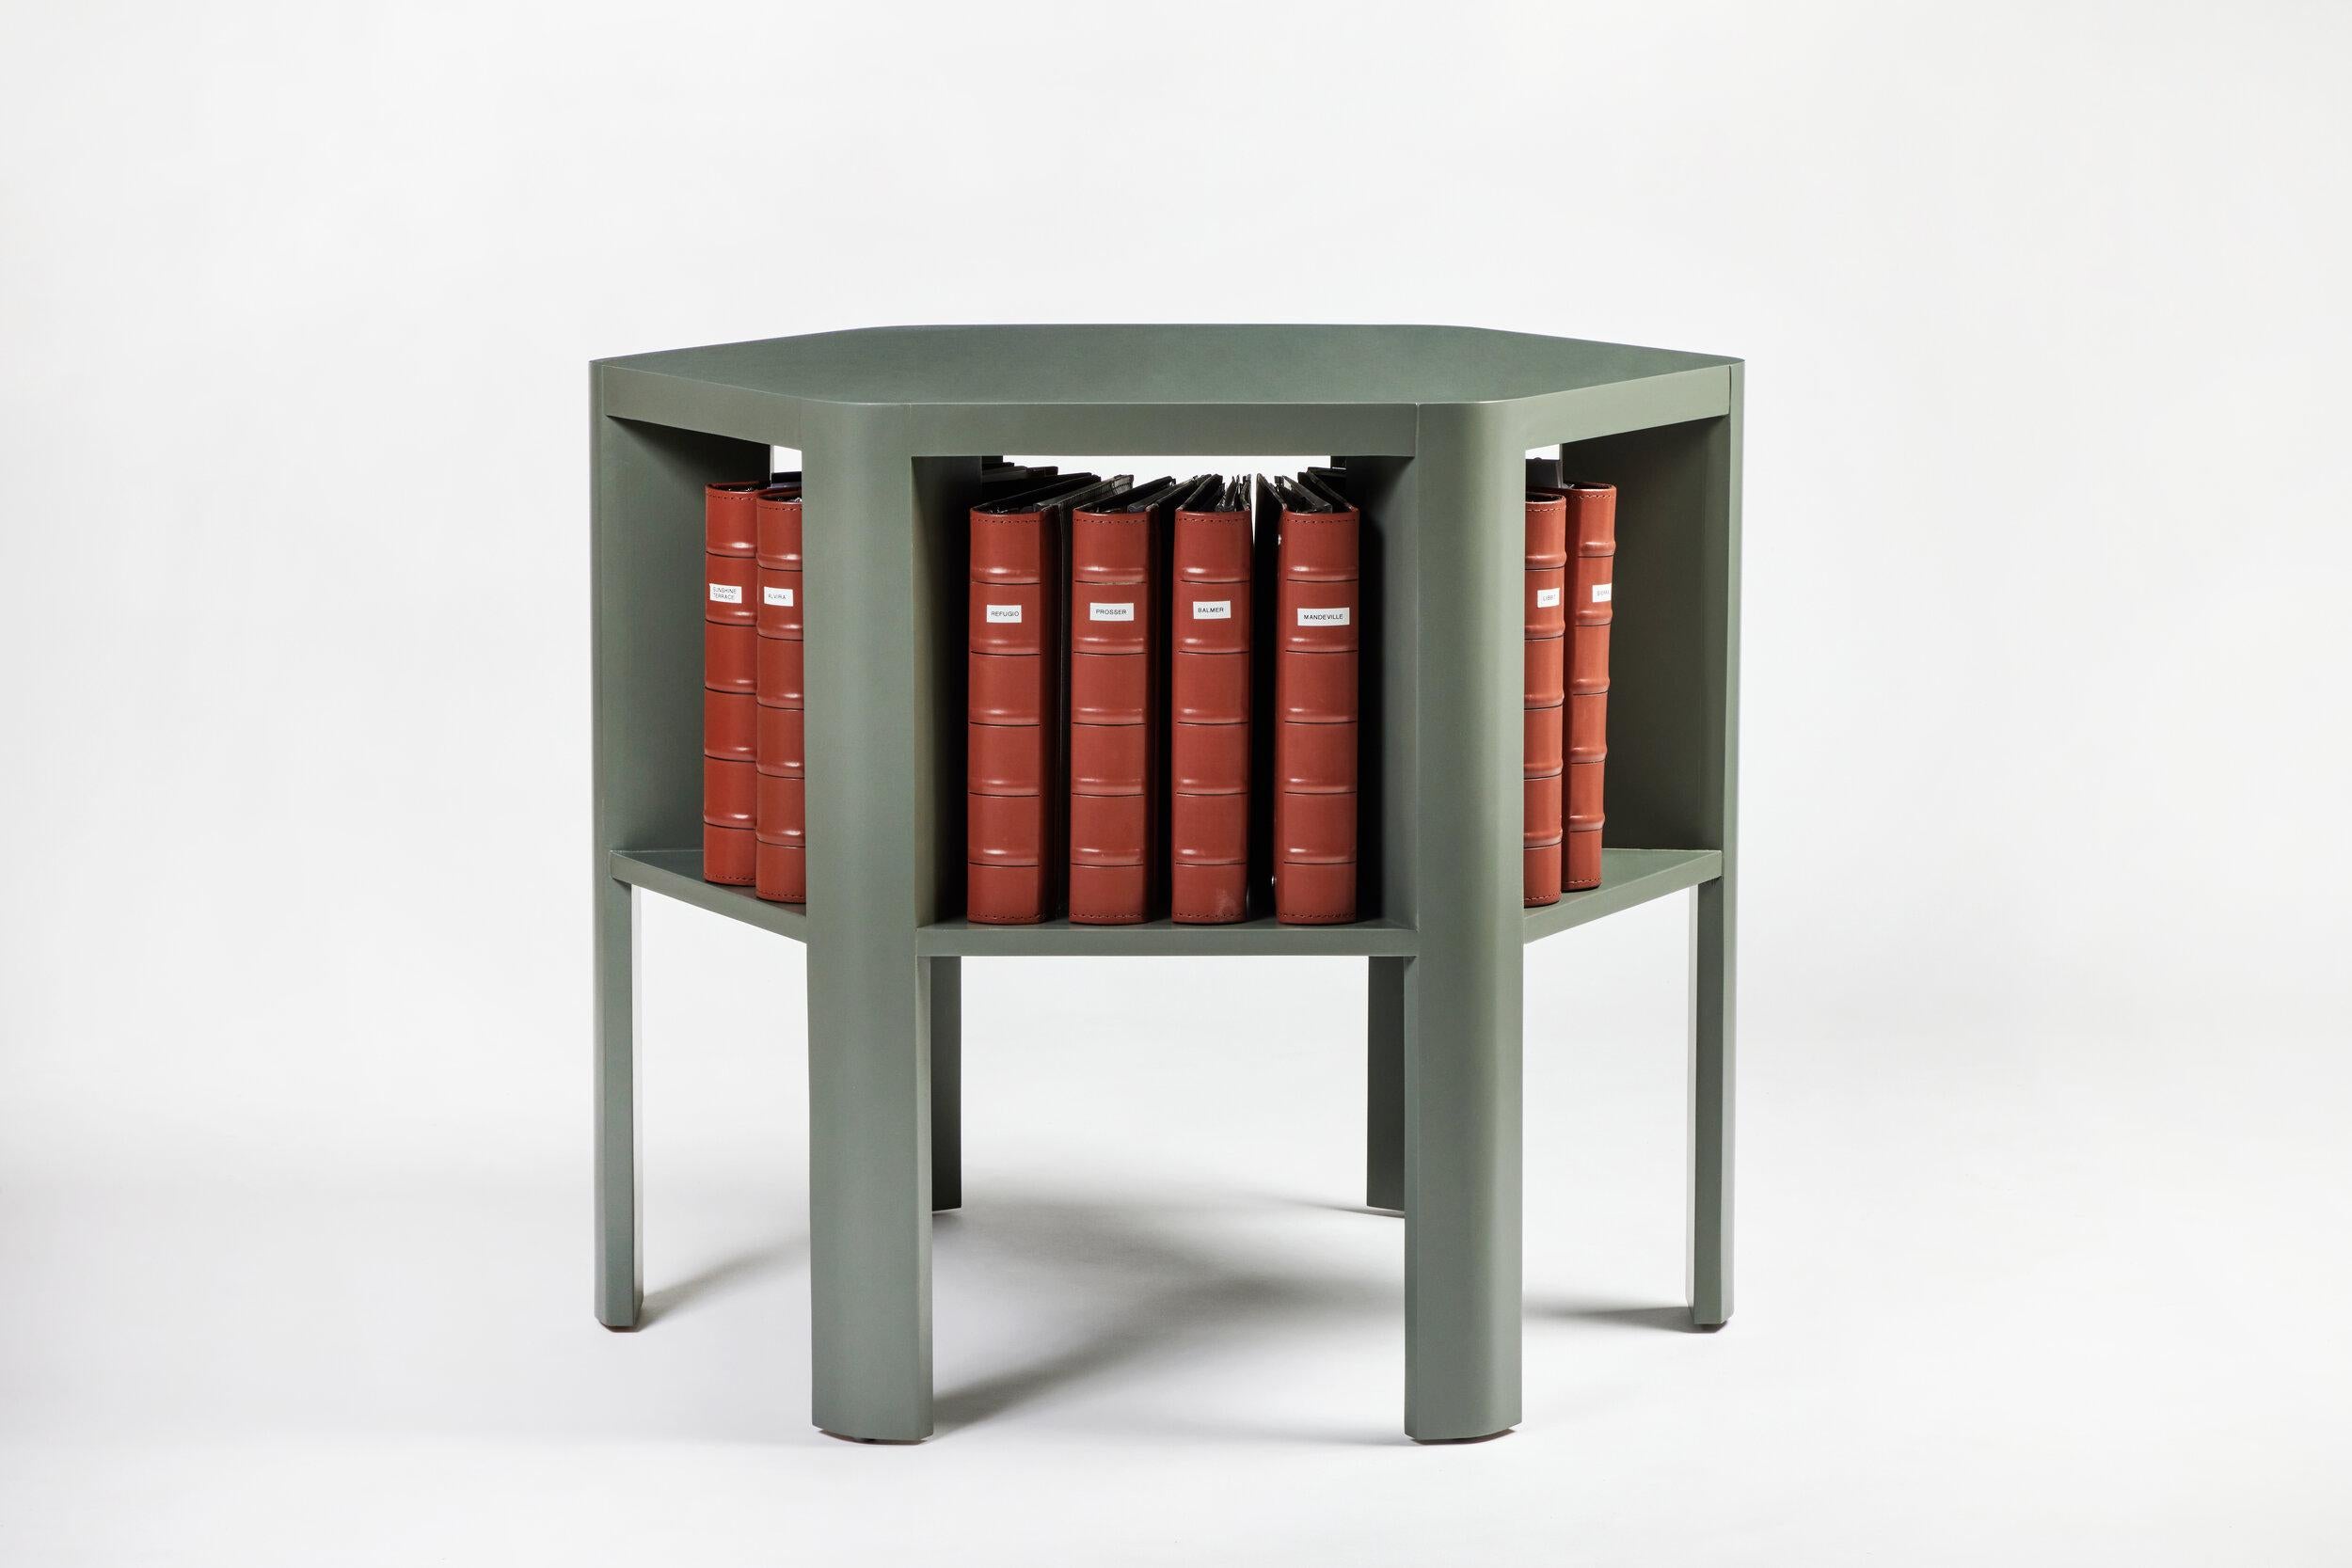 Martin & Brockett's Library Table is a chic work horse. Stripped of unnecessary details, its minimalist design makes this table functional for sober book storage or as an efficient small space bar (bottle storage below frees up the table top for